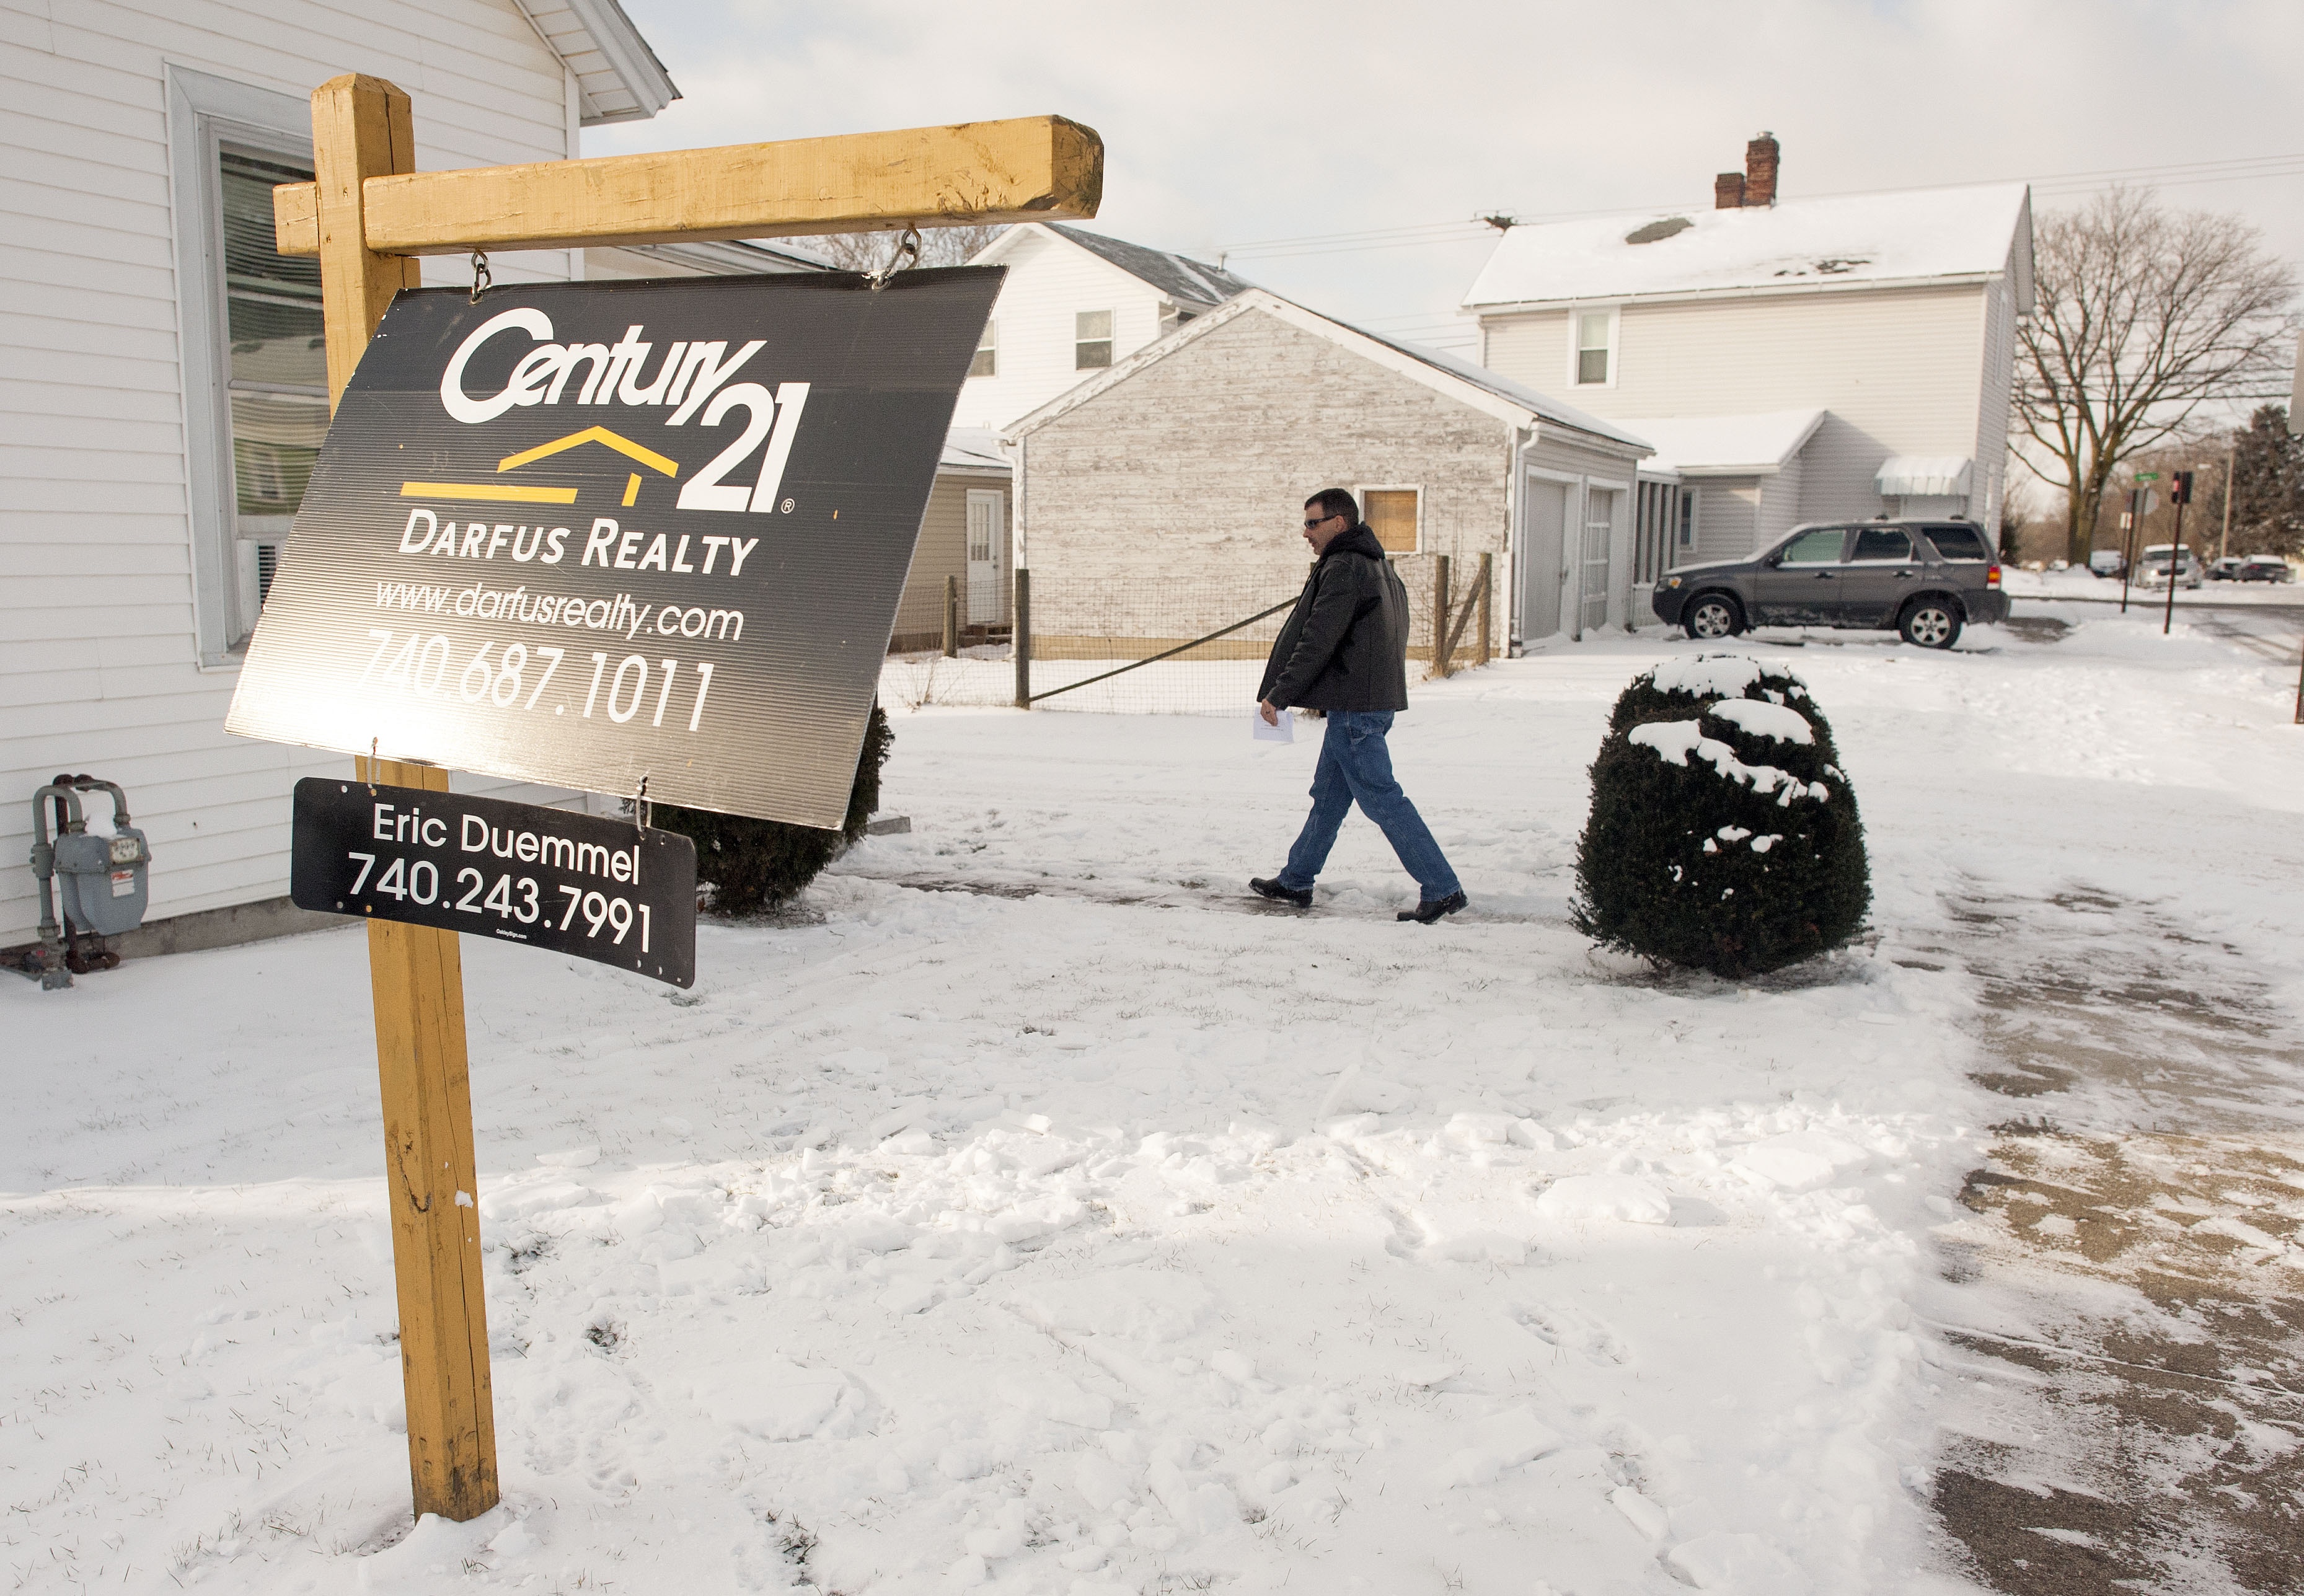 Ride-Along With A Realtor As U.S. Housing Market Looks To Rebound in 2015